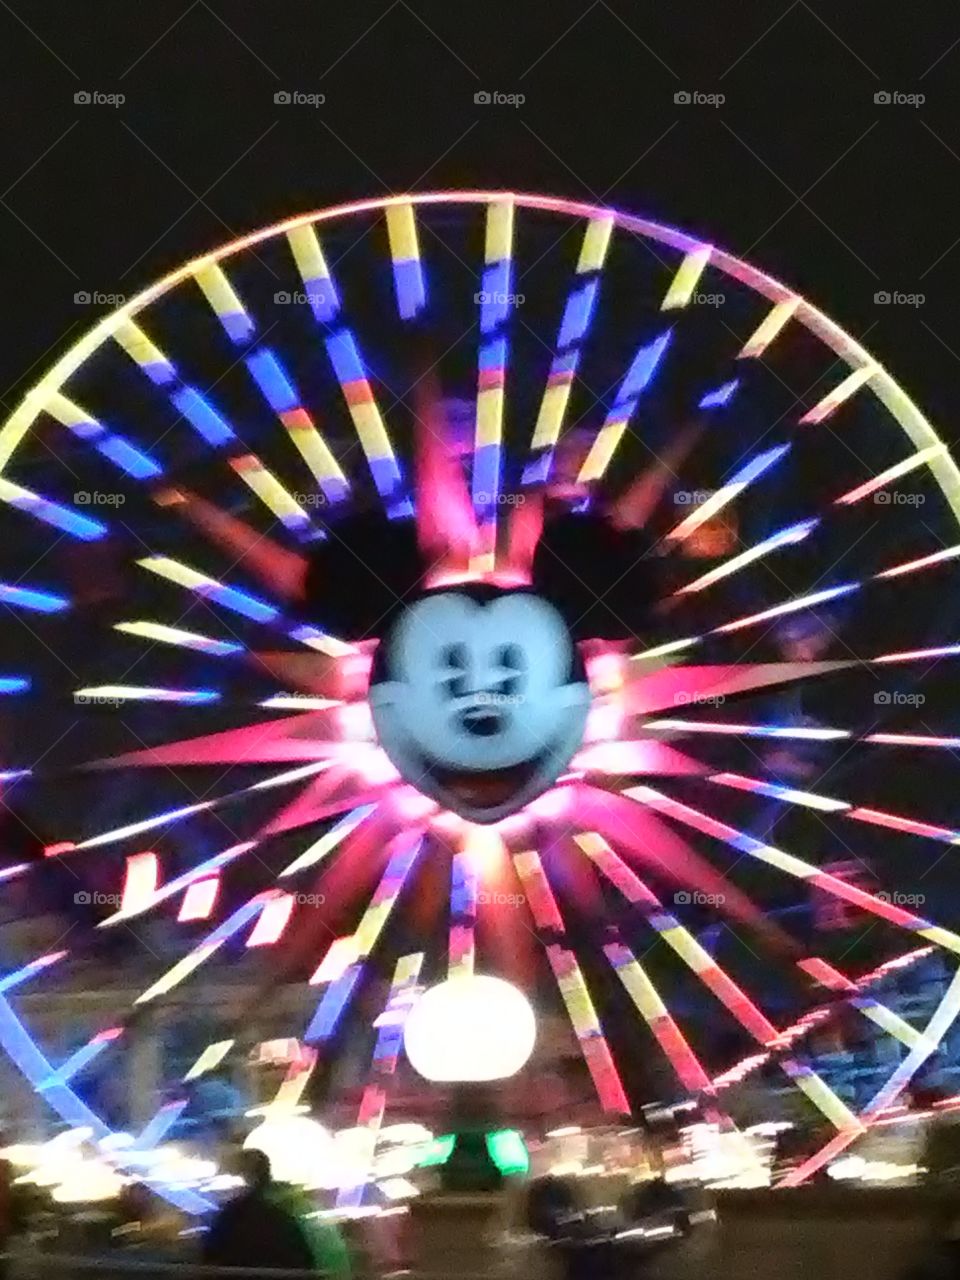 in California adventure. I saw this beautiful Mickey mouse ferris wheel. it was before the world of color light show.